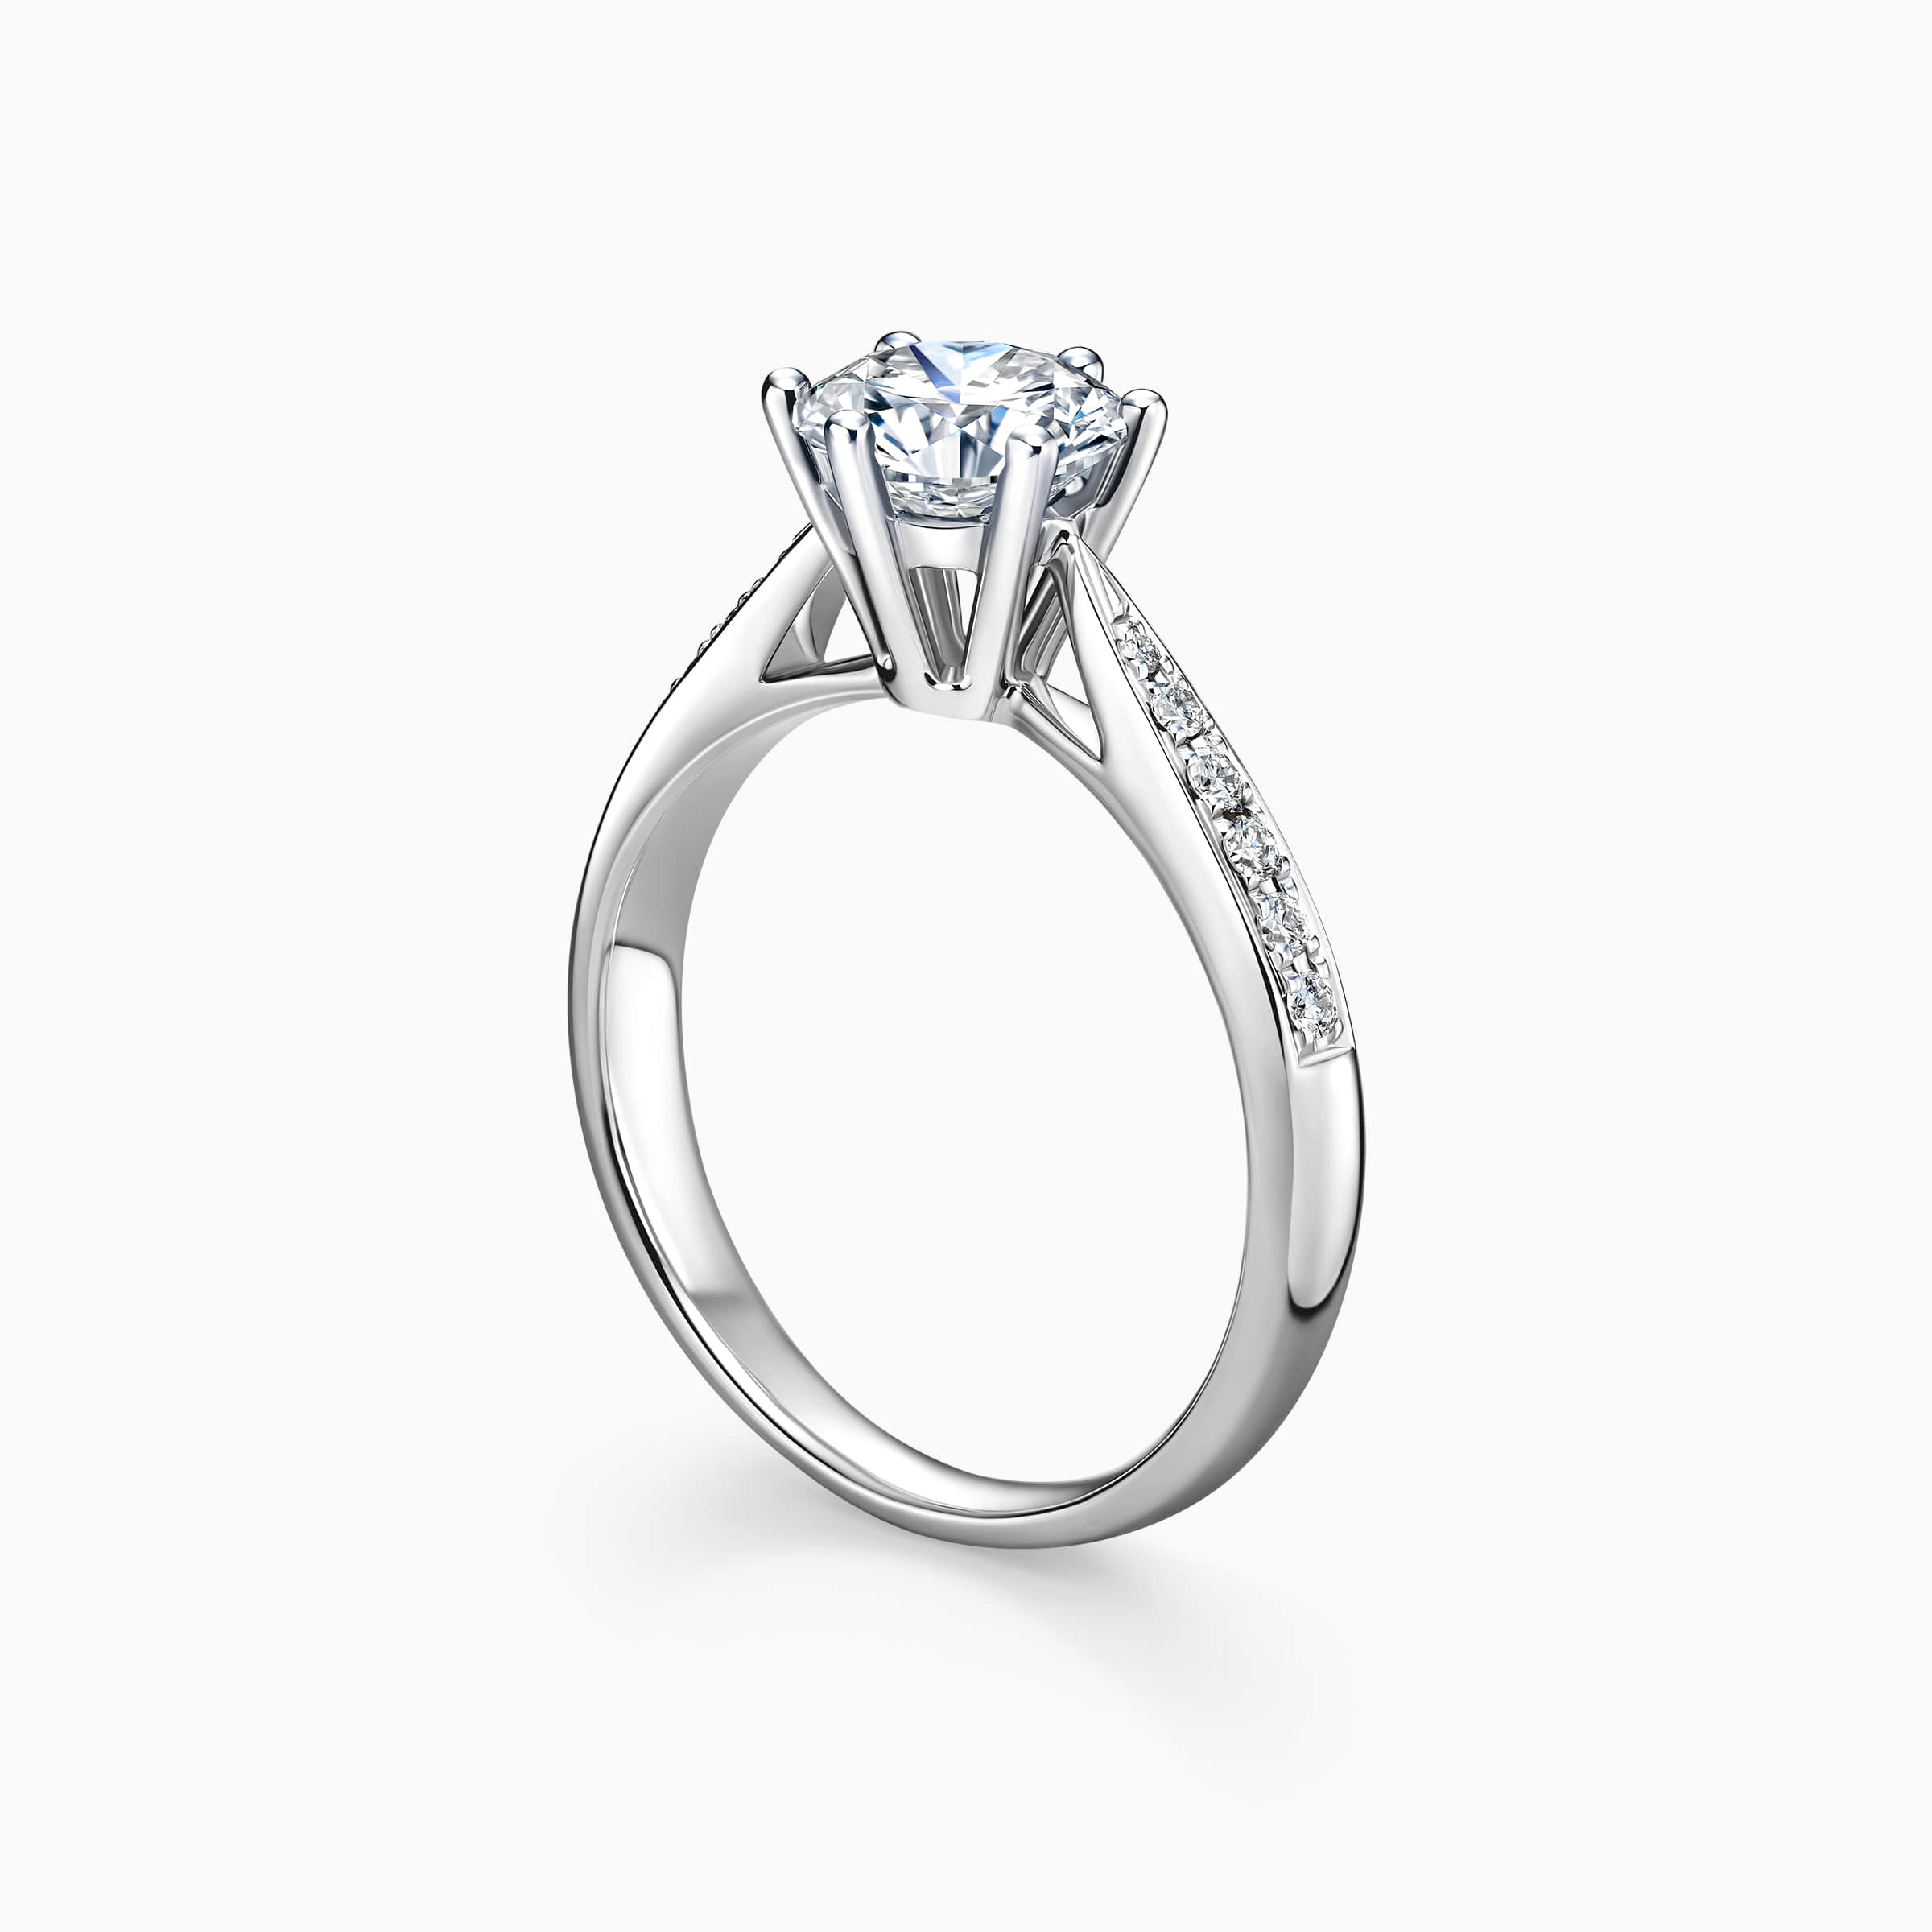 darry ring 6 prong engagement ring angle view